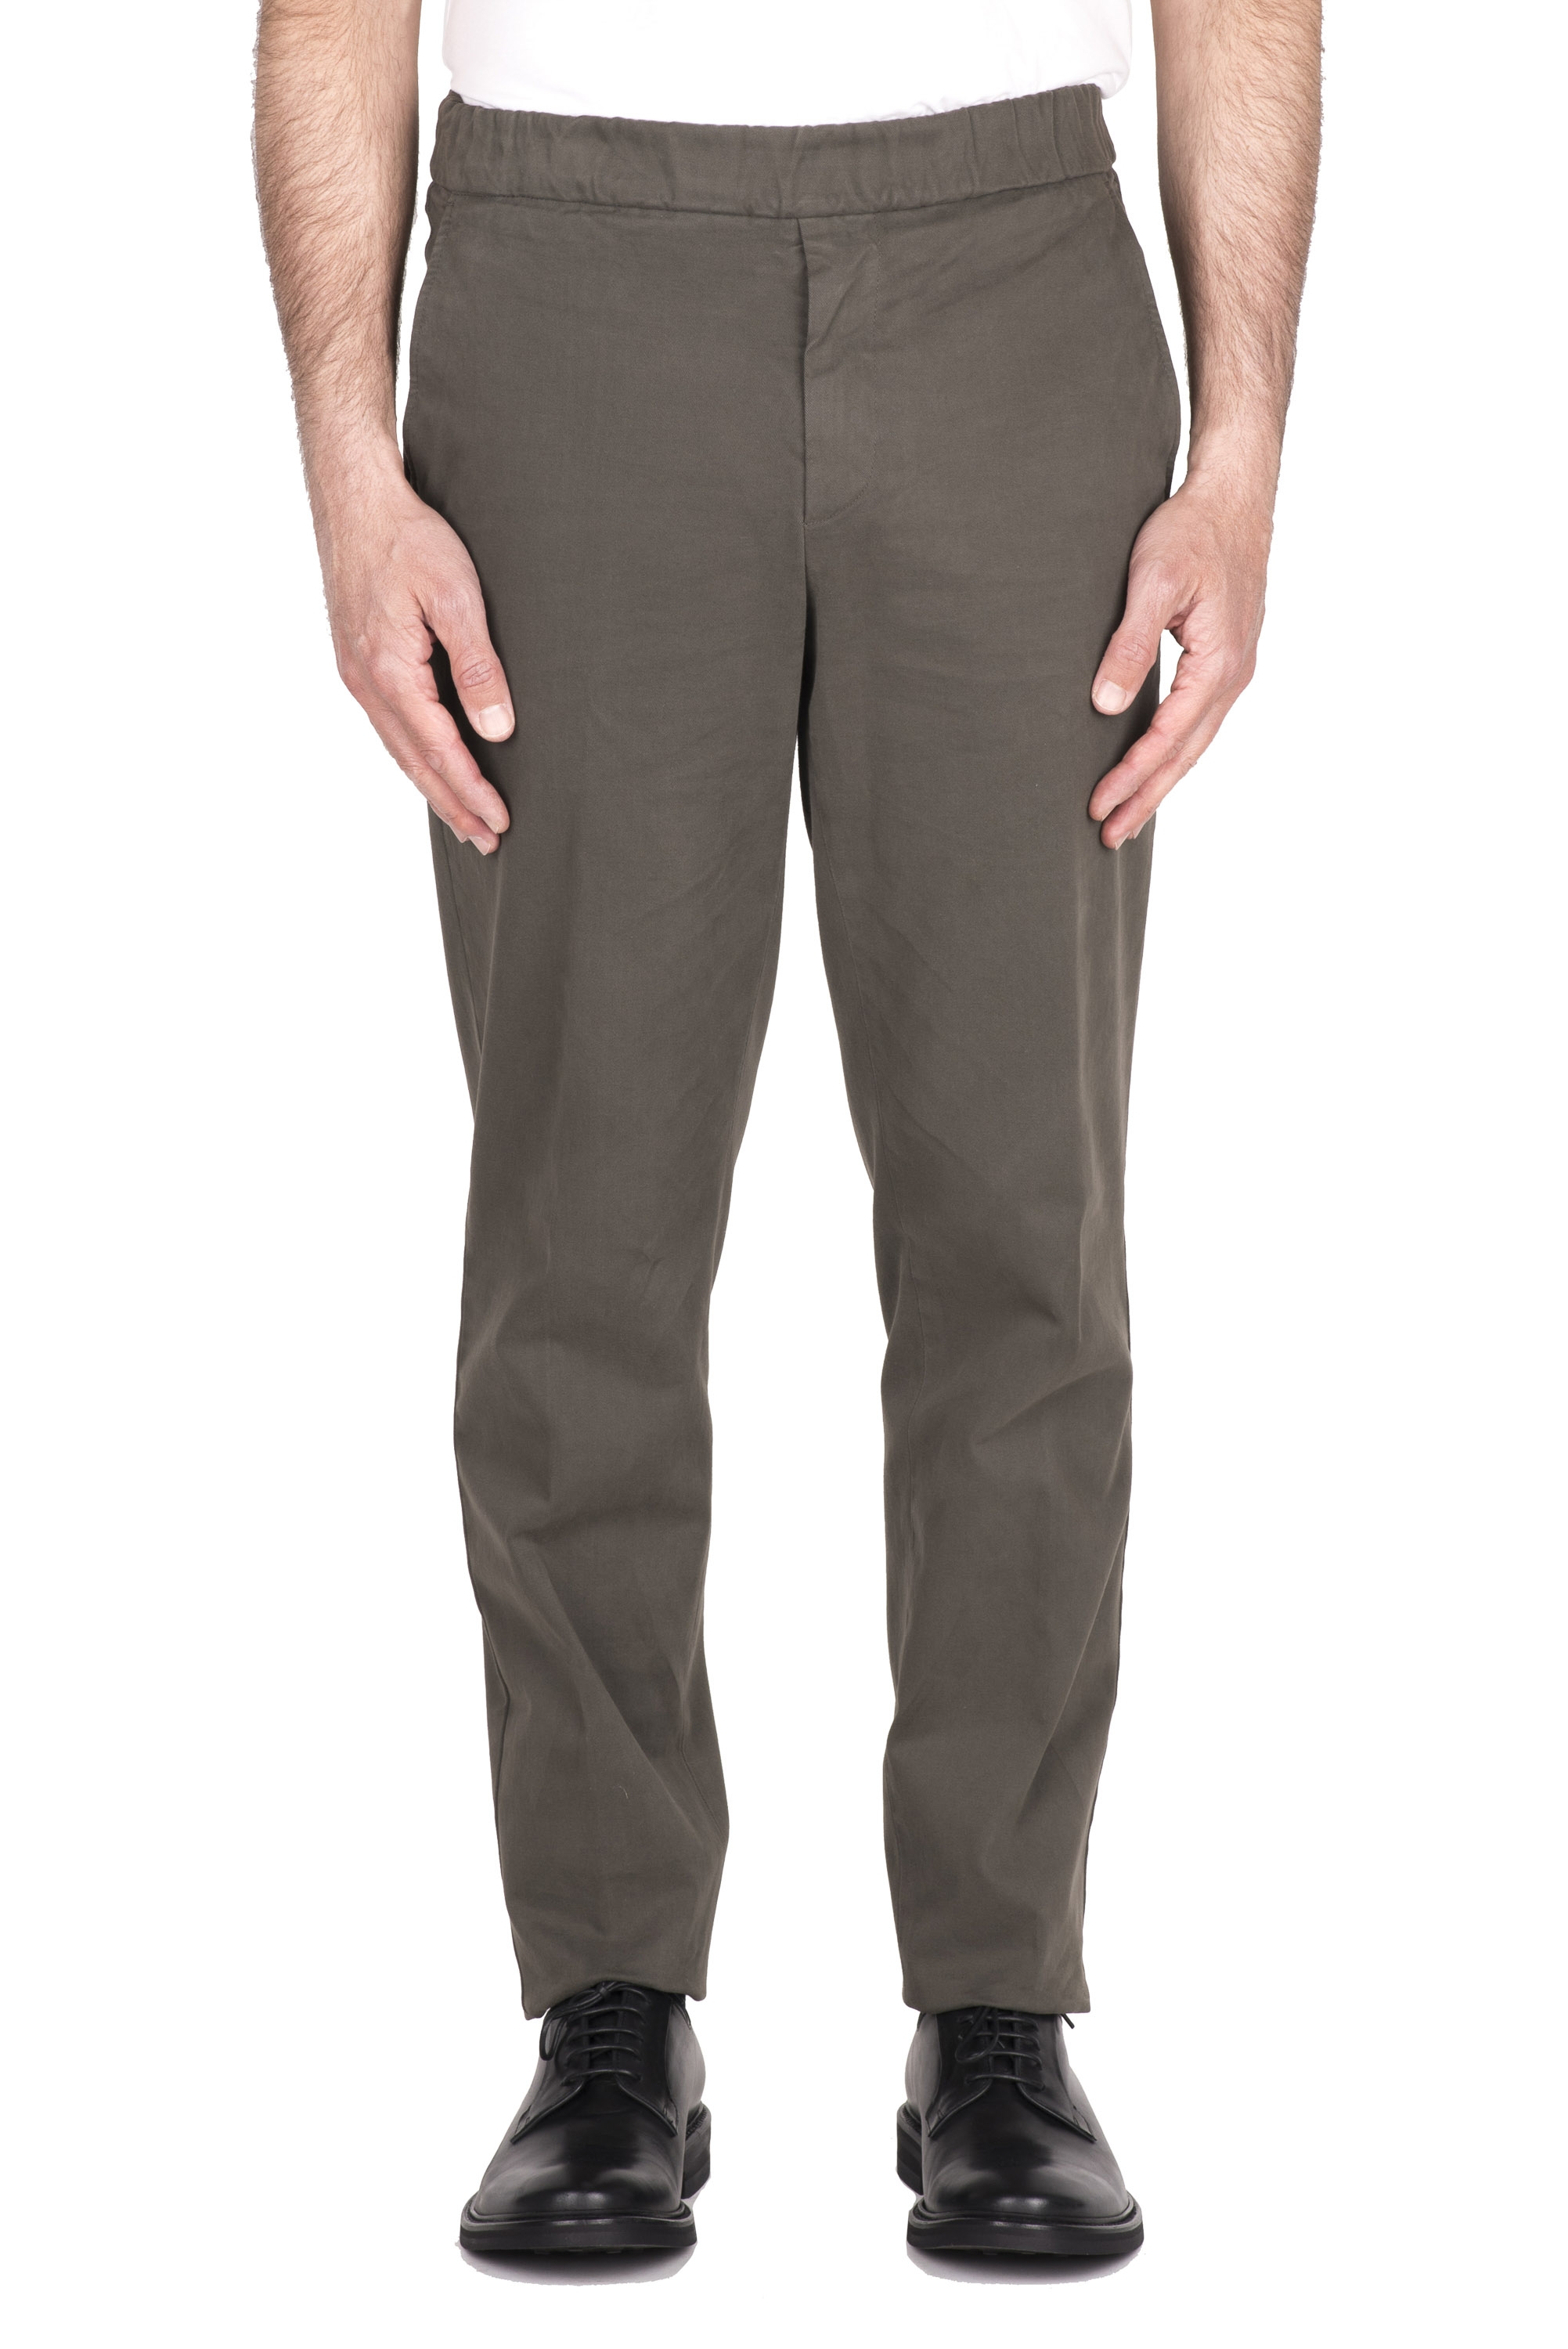 SBU 04622_23AW Comfort pants in brown stretch cotton 01